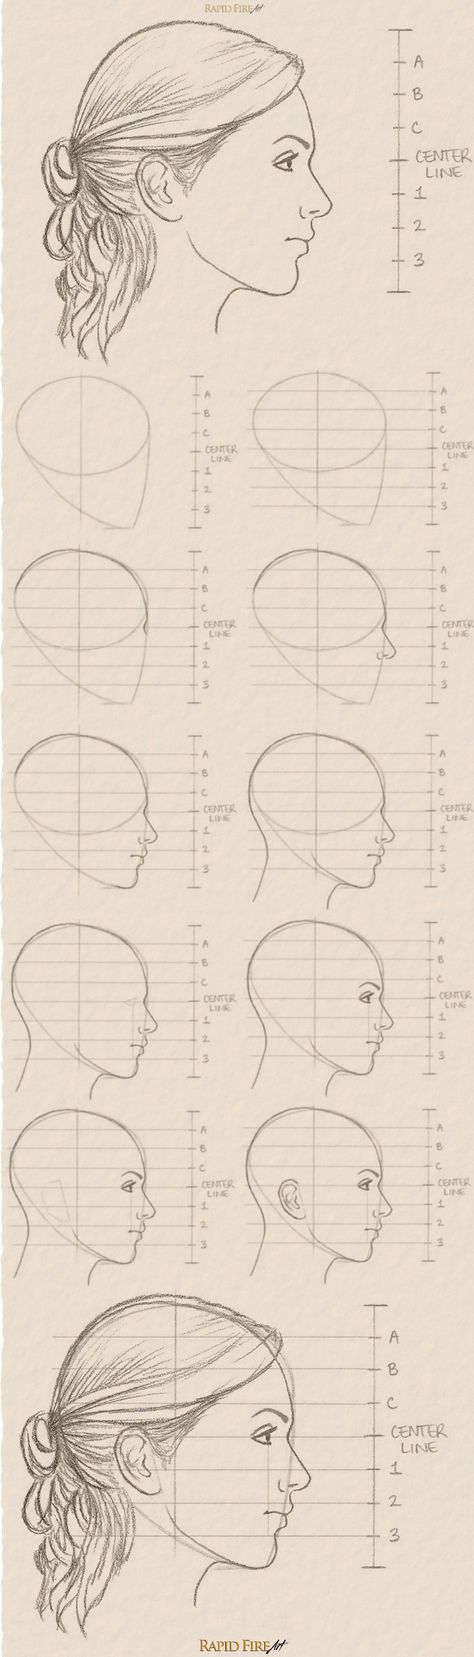 11 steps on how to draw a female face (side view)